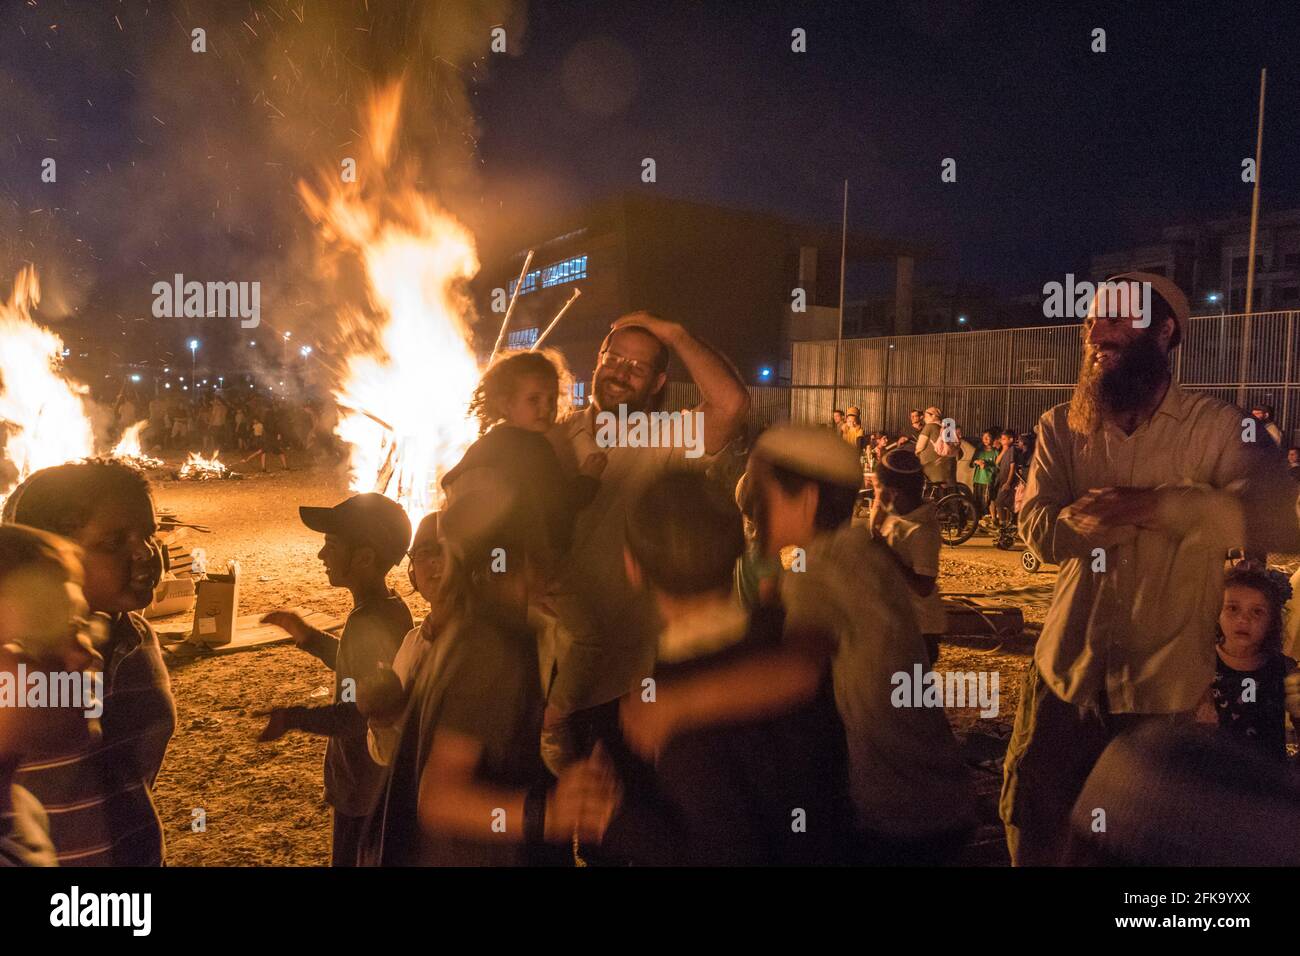 People dance near a fire during the Jewish Holiday of Lag Ba'Omer, which takes place every  18th of Hebrew month Iyar. It is customary during this holiday to make fires. This year, due to fire hazard warning, all fires were concentrated to few sites, hence the large number of pyres. Stock Photo